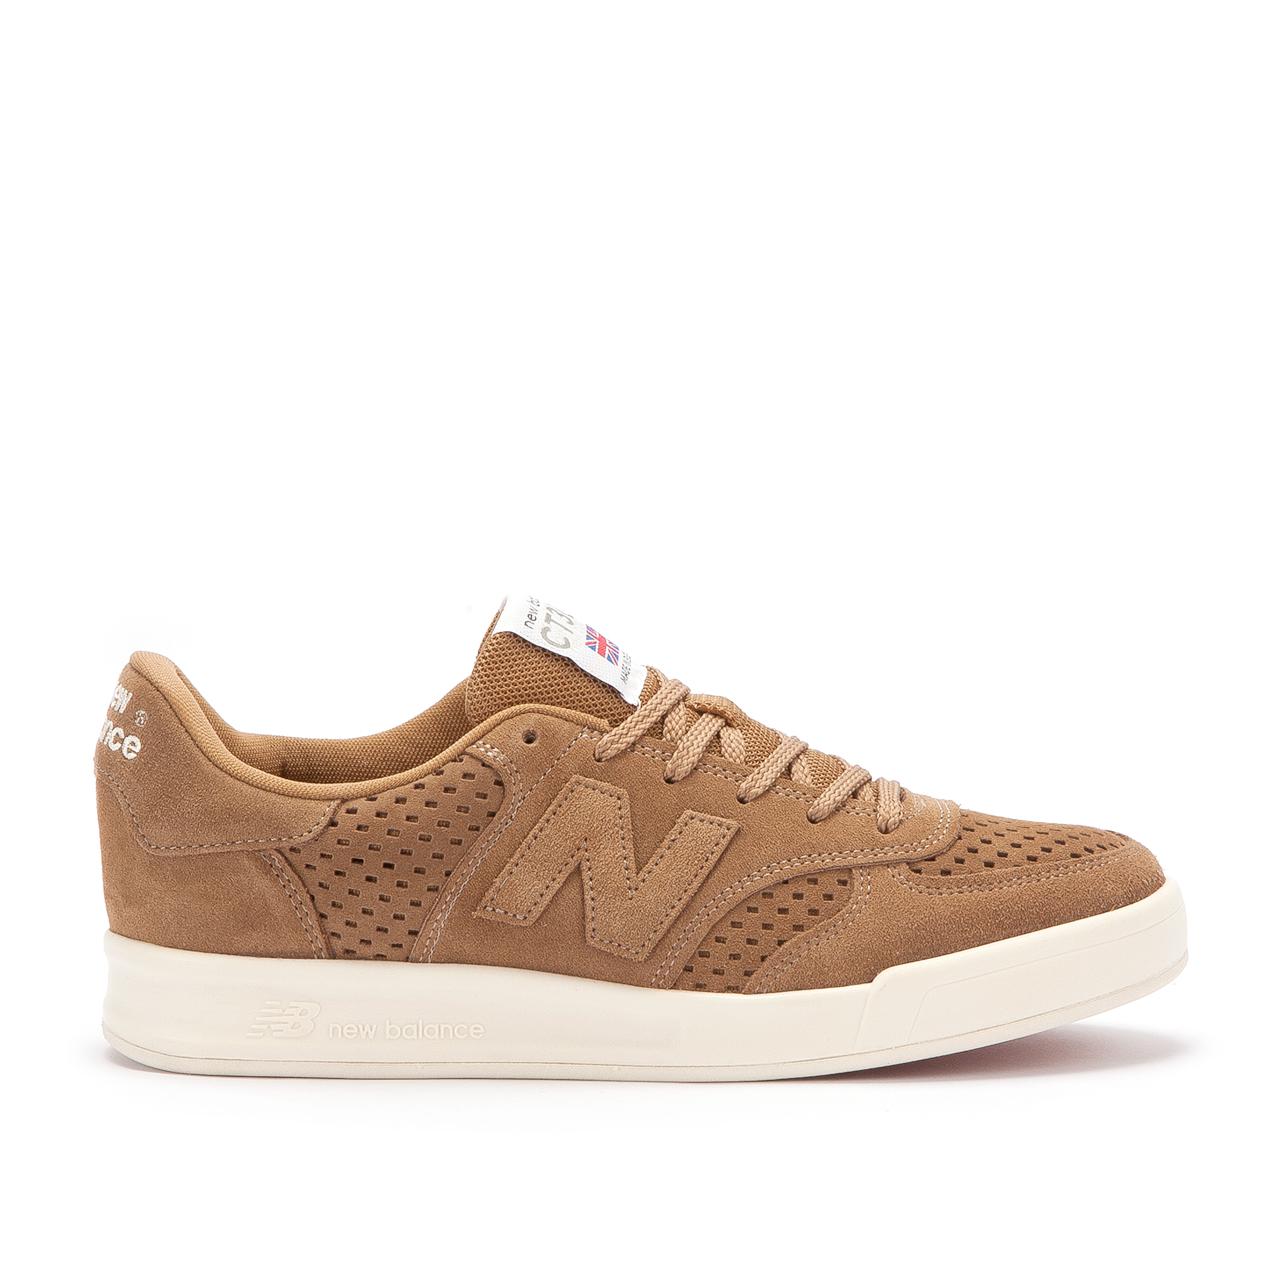 New Balance Suede Ct 300 Slb in Brown for Men - Lyst